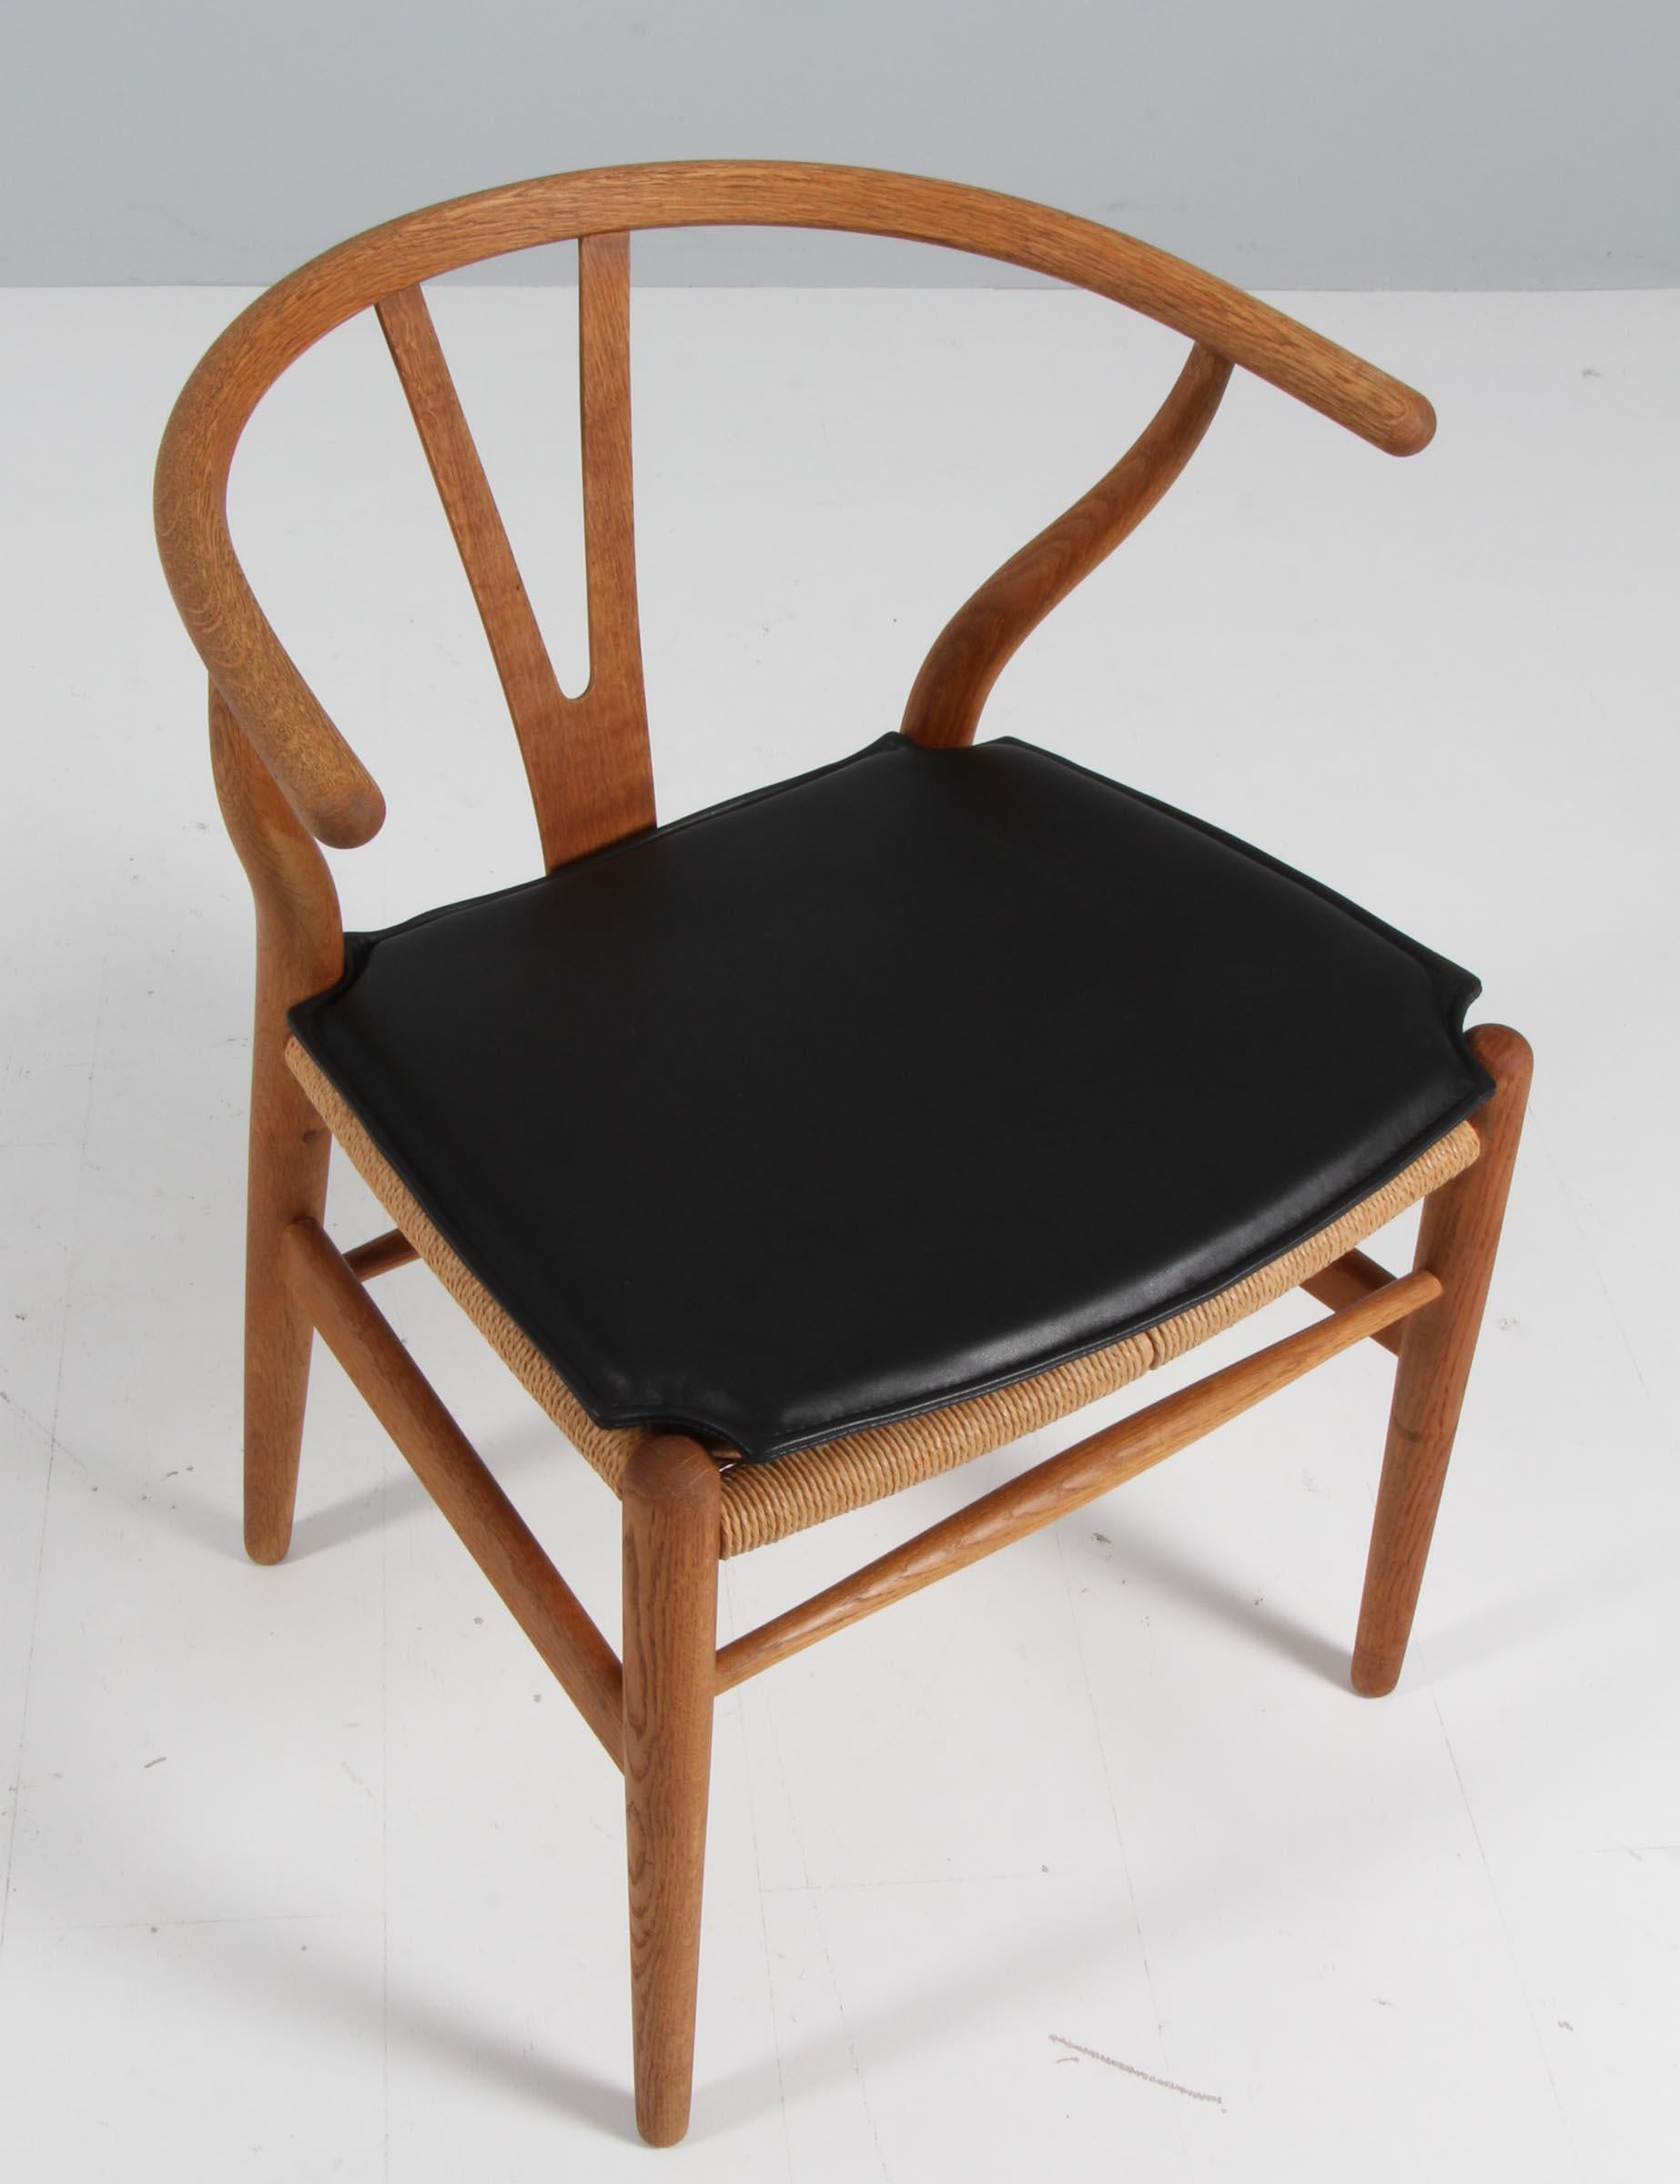 Hans J. Wegner cushions for wishbone chair model CH24.

Made in black pure aniline leather and good quality foam.

Only the cushion, not the chair.